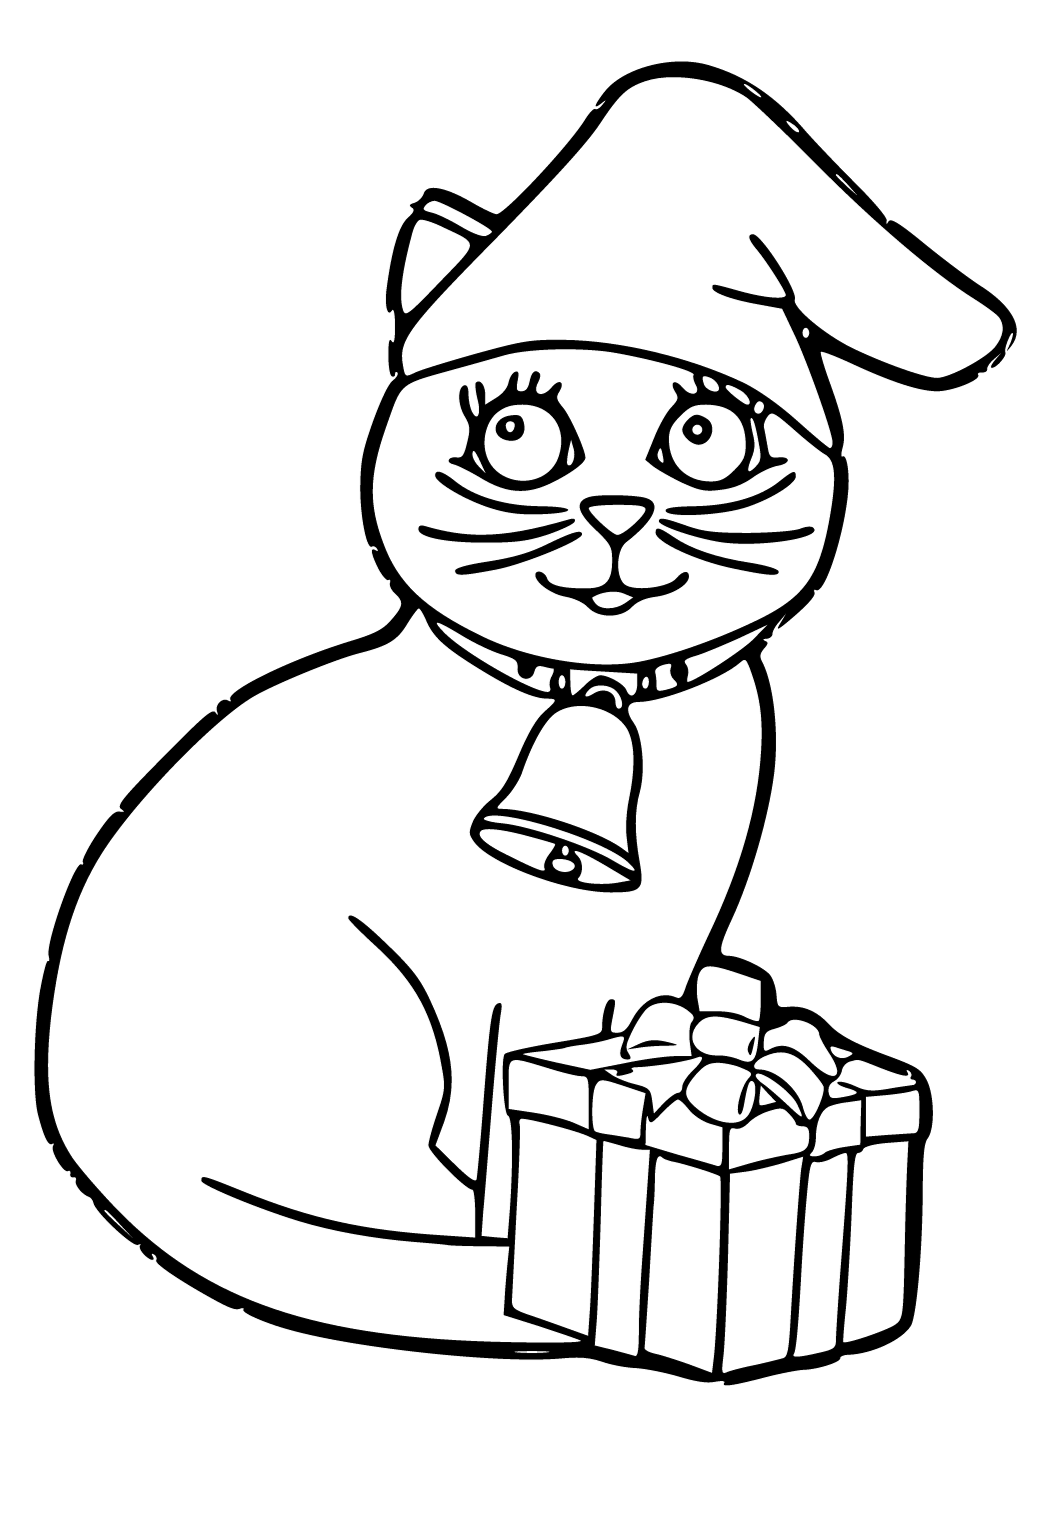 Free printable christmas cat gift coloring page for adults and kids